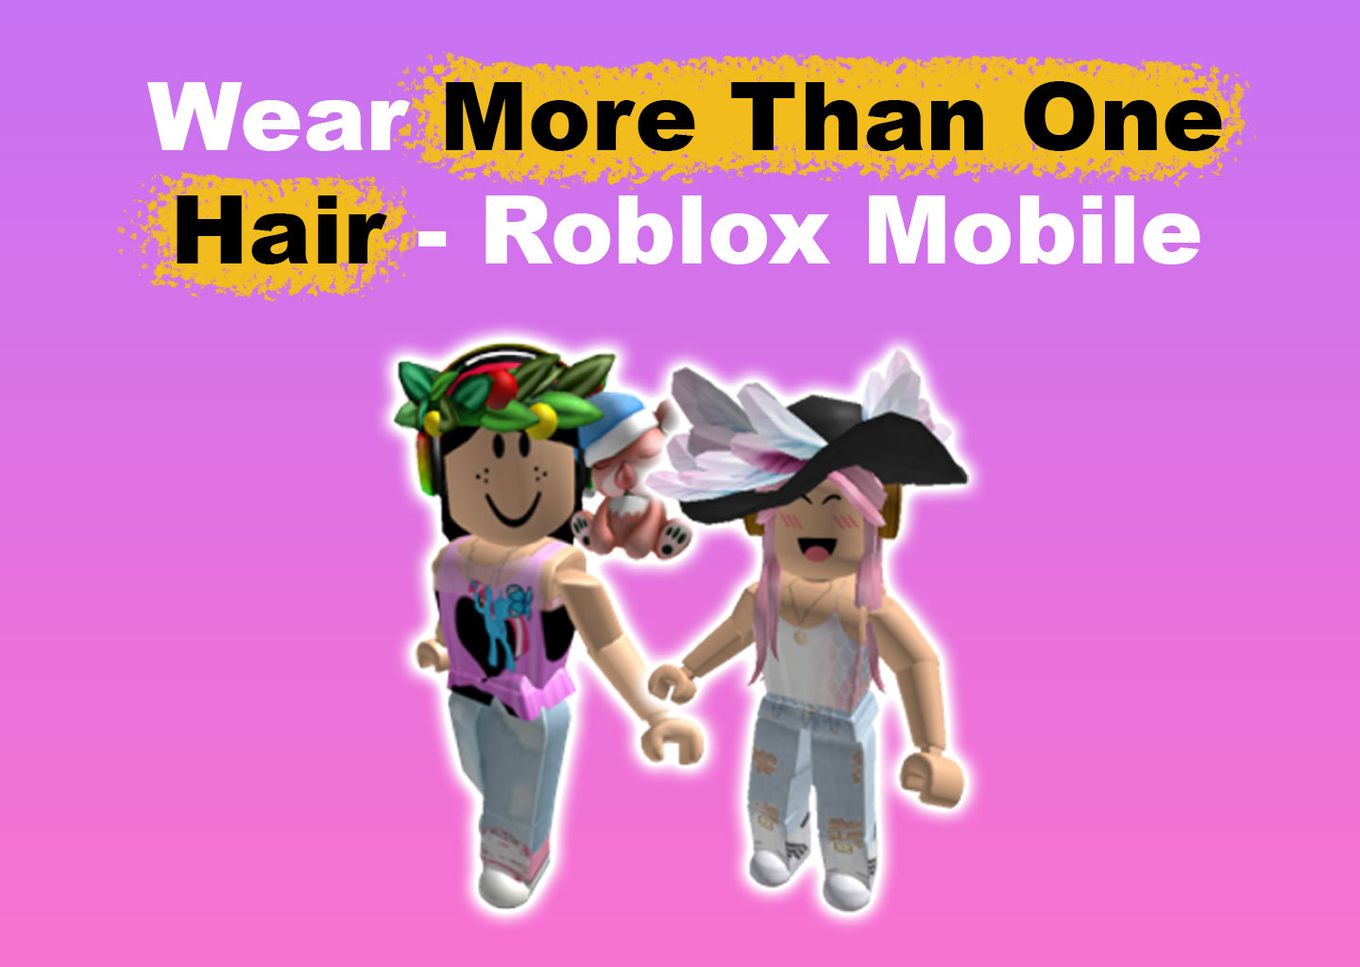 Wear More Than One Hair - Roblox Mobile